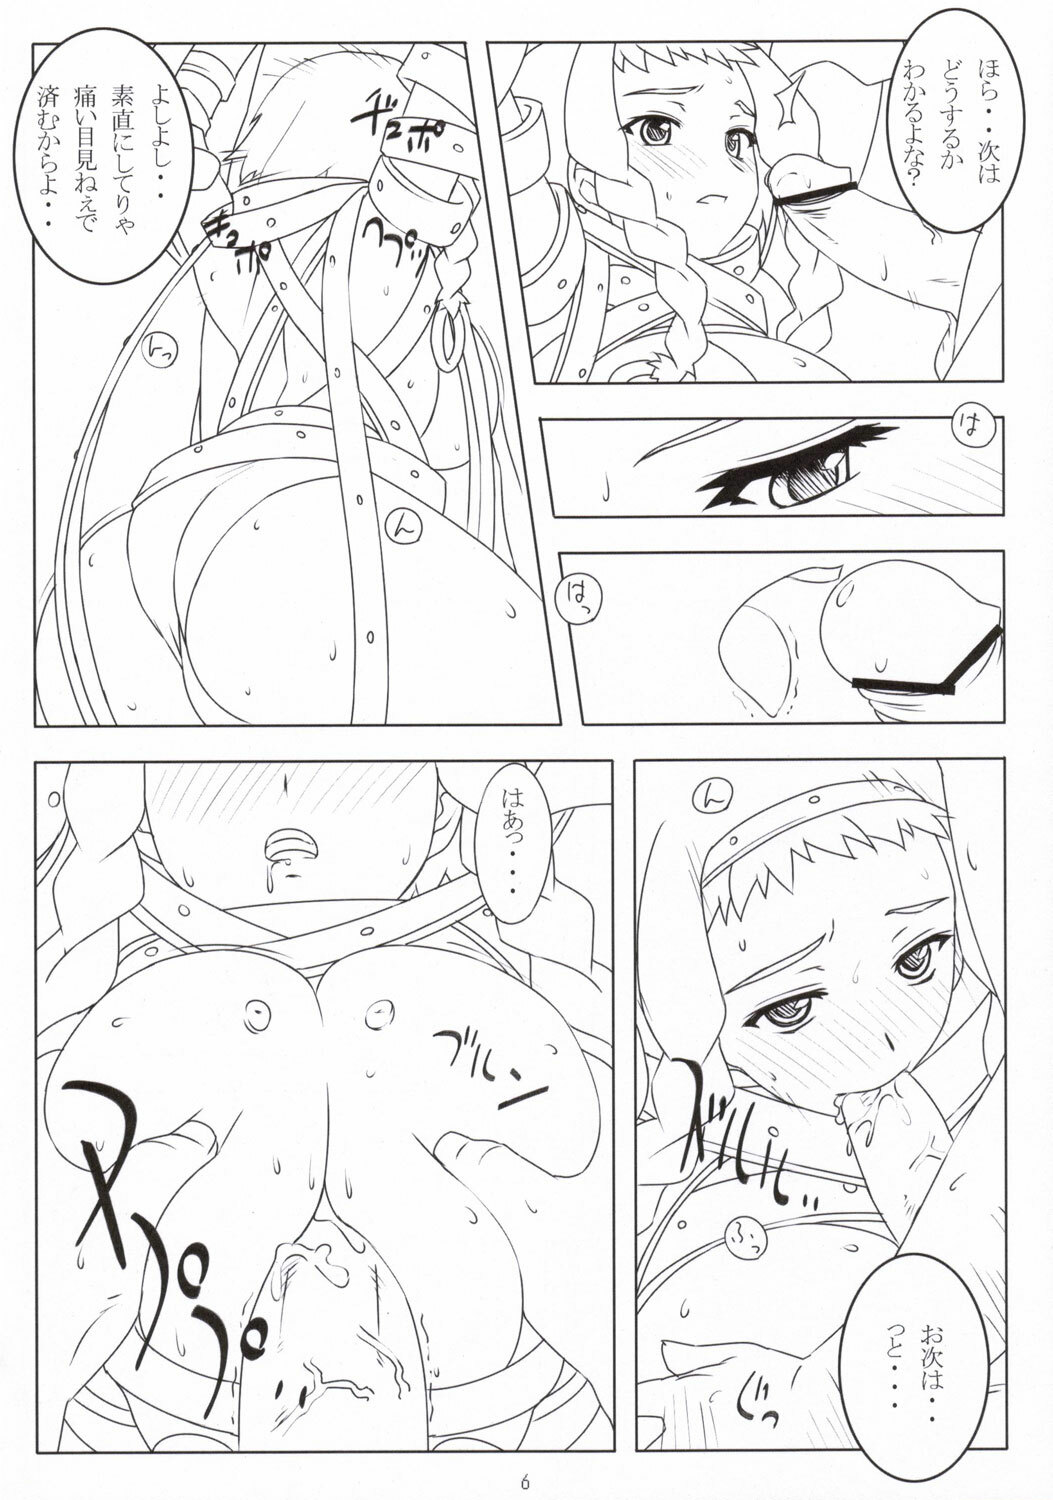 (C69) [NF121 (Midori Aoi)] Ken to Megane (Queen's Blade) page 5 full